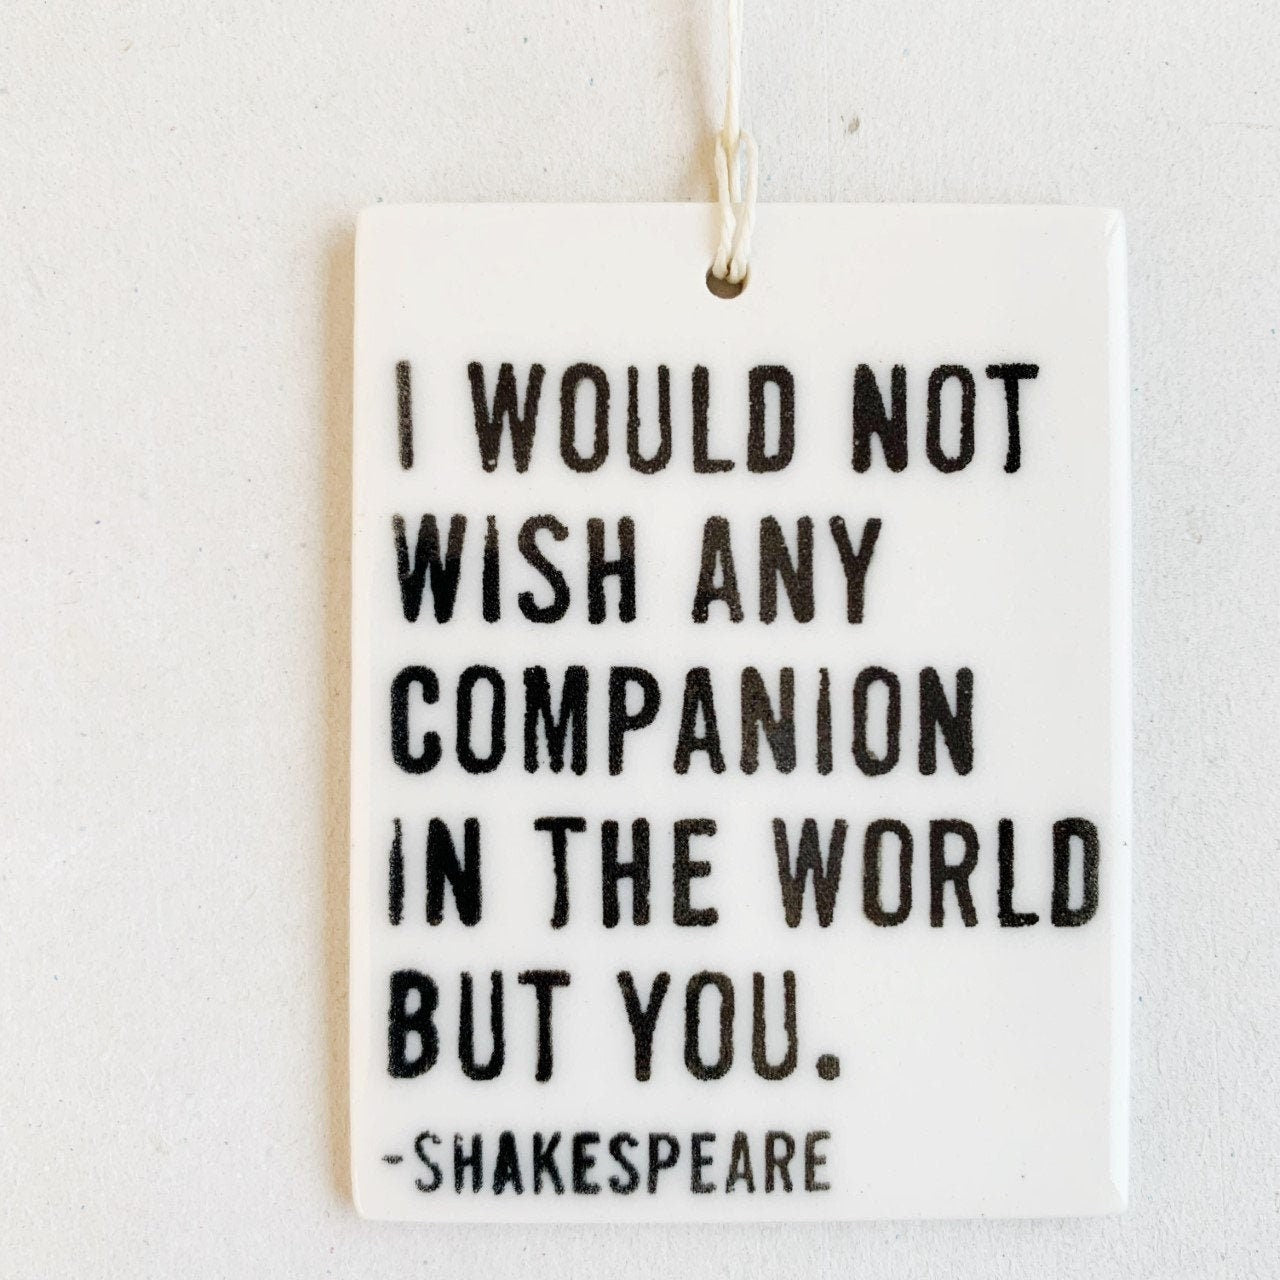 shakespeare quote | ceramic wall tag | ceramic wall art | screenprinted ceramics | companion | gift for companion | gift for spouse